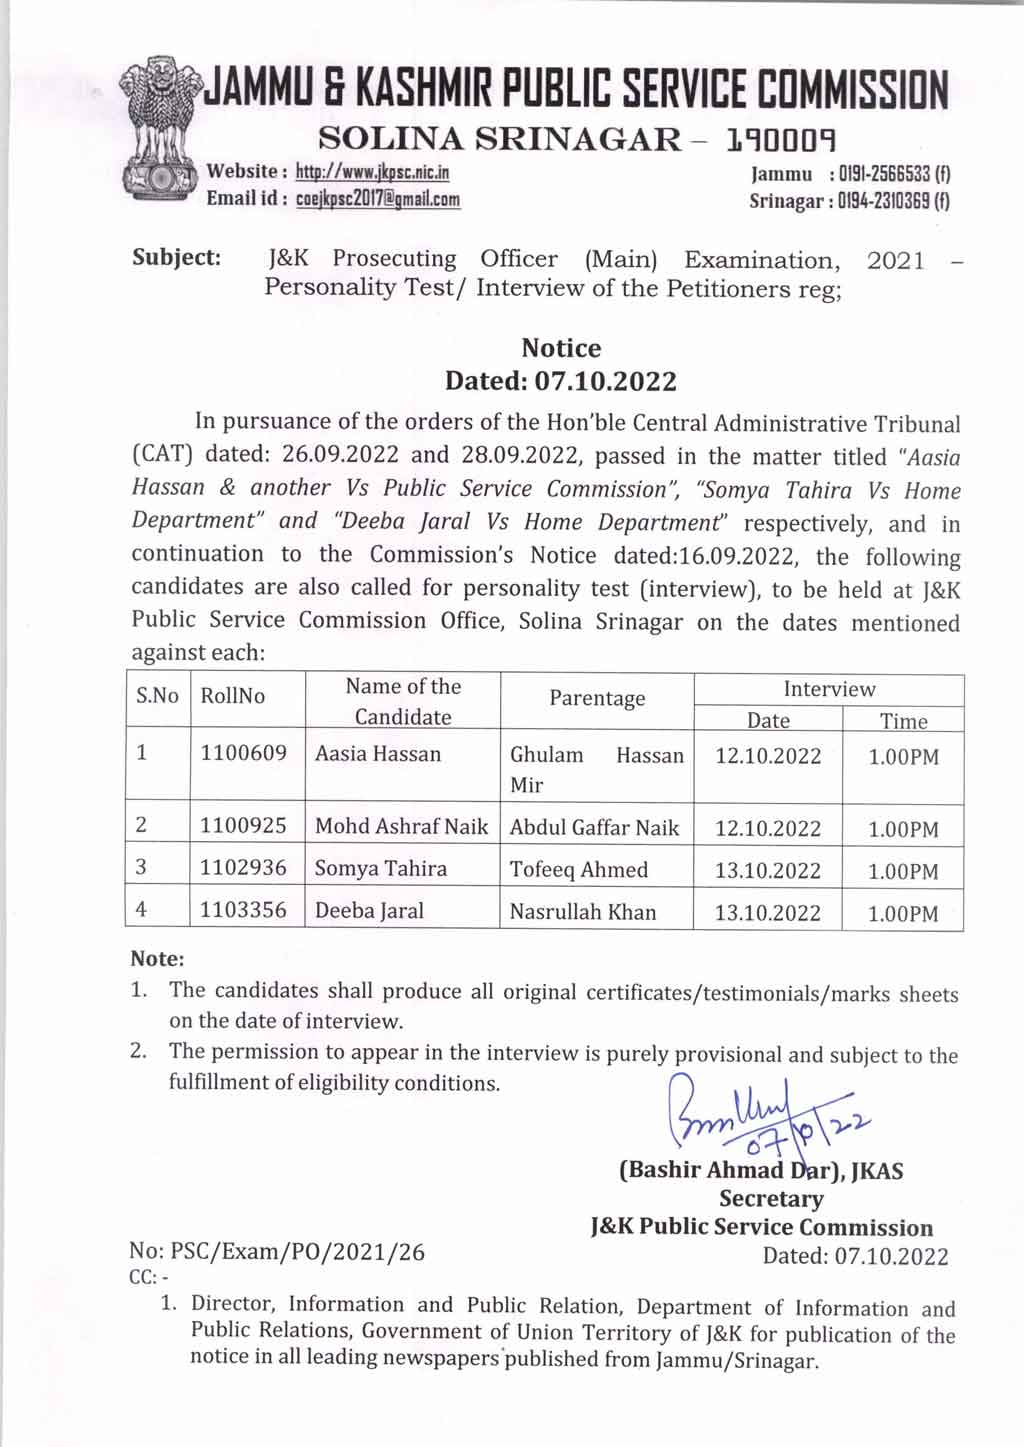 JK Prosecuting Officer (Main) Exam Personality Test (Interview).